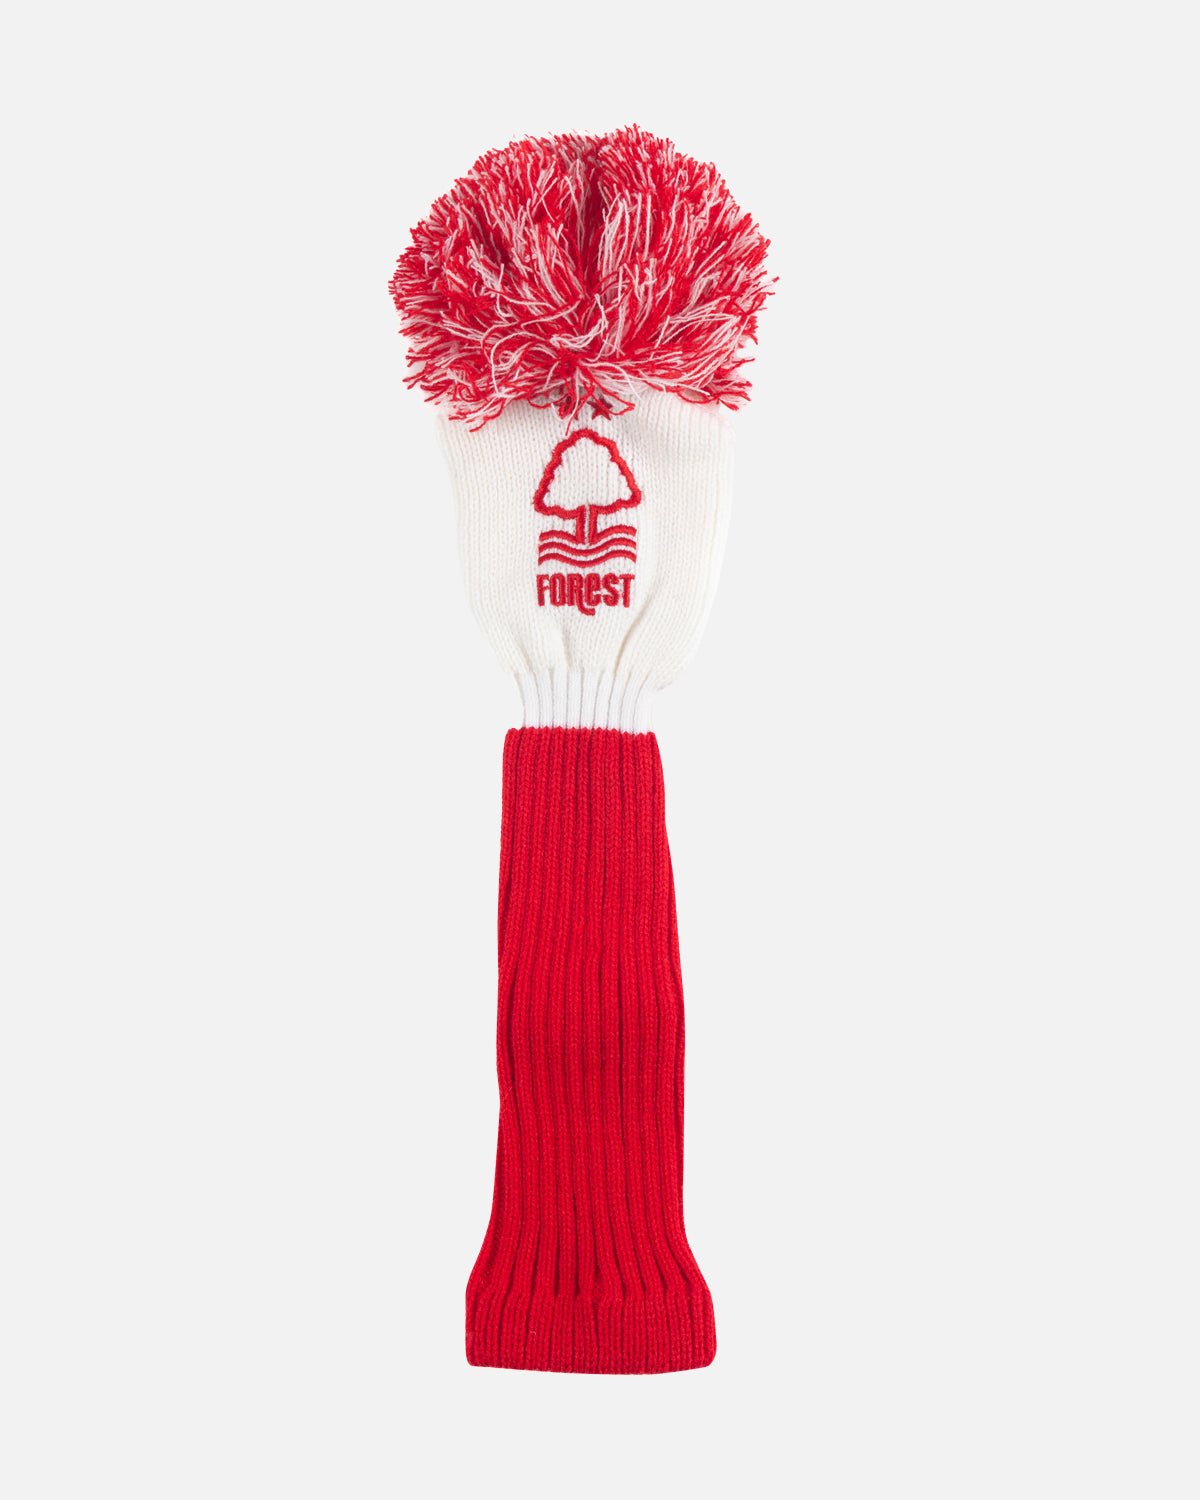 NFFC Pom Pom Head Cover - Nottingham Forest FC